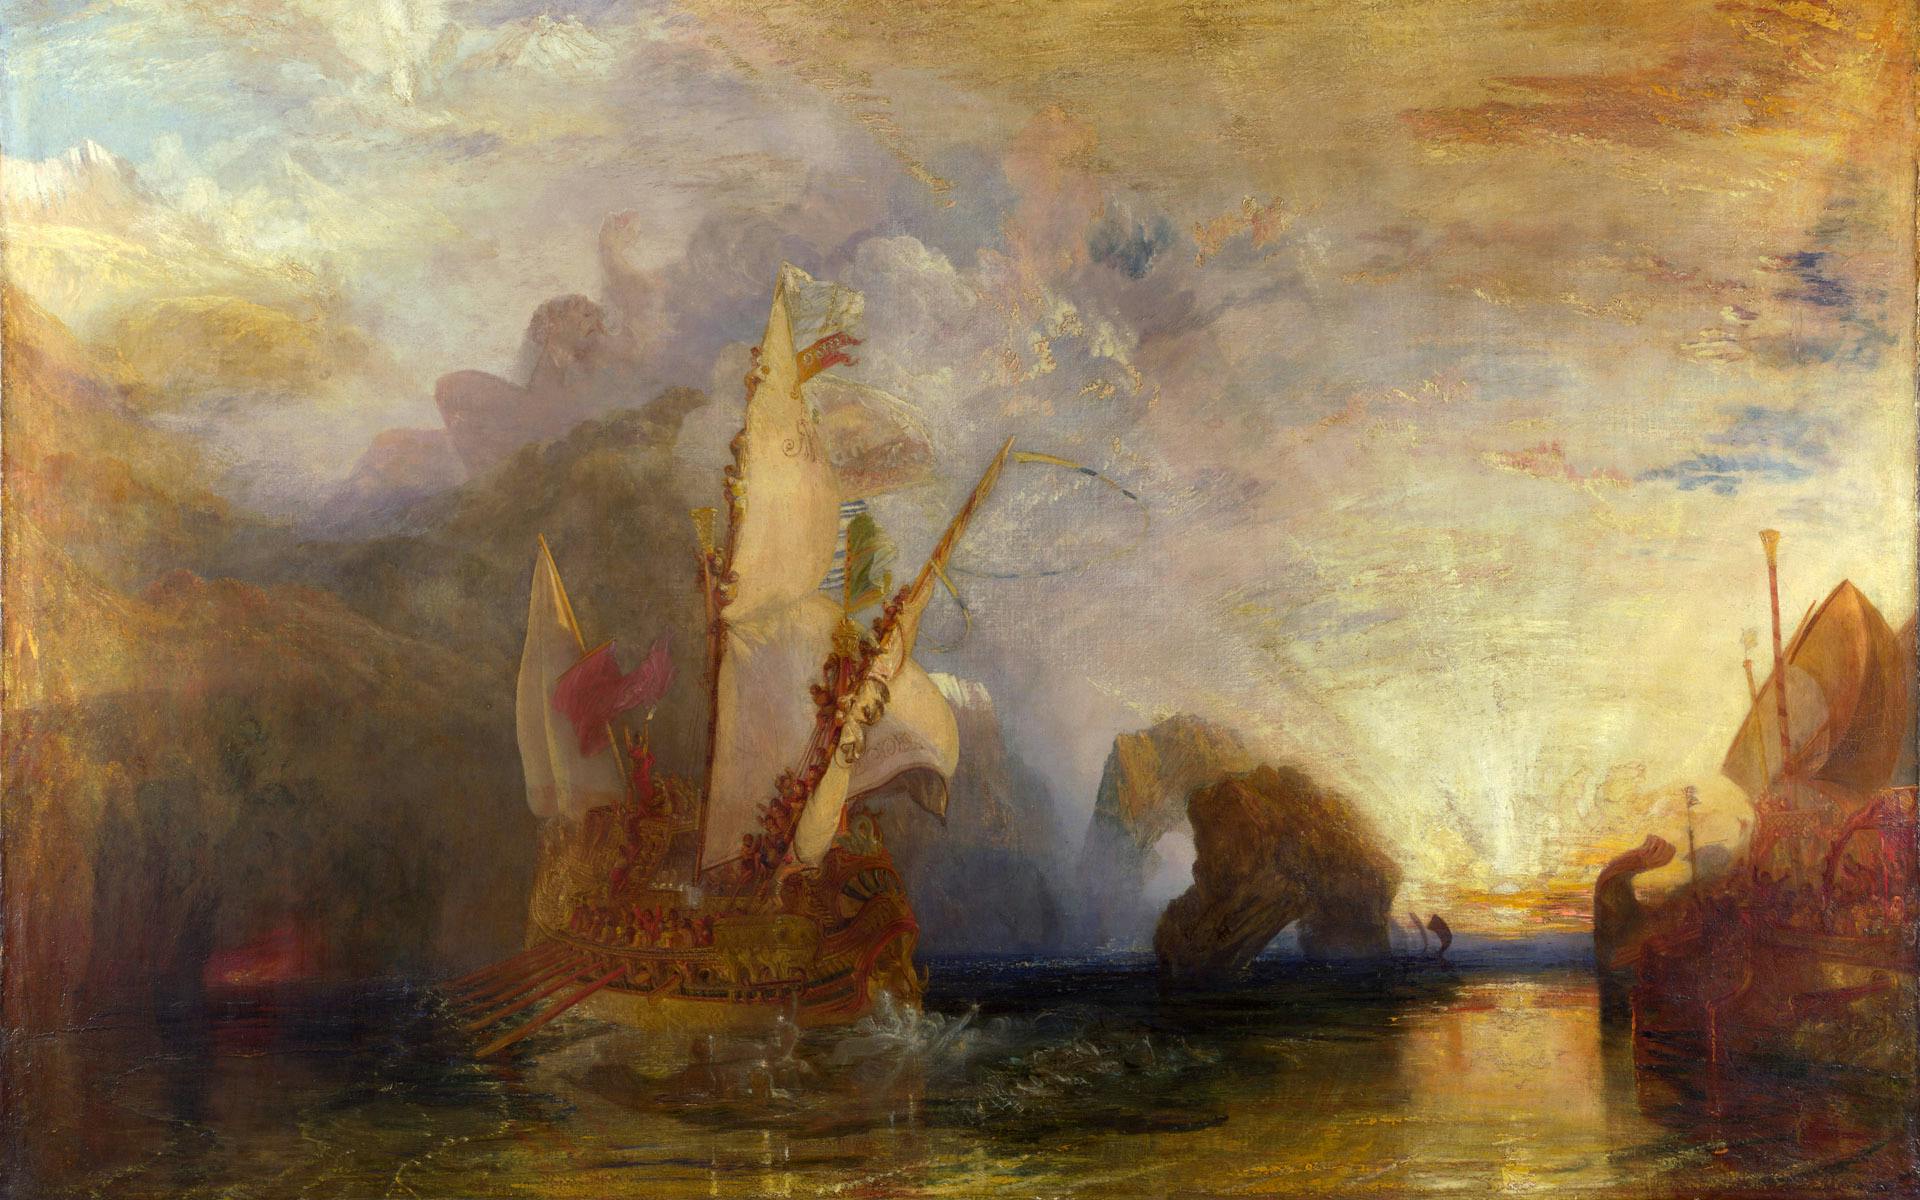 Turner’s Ulysses Deriding Polyphemus is dominated by a vast and heroic sunset. The faint outlines of stallions carrying the sun over the horizon can just be made out